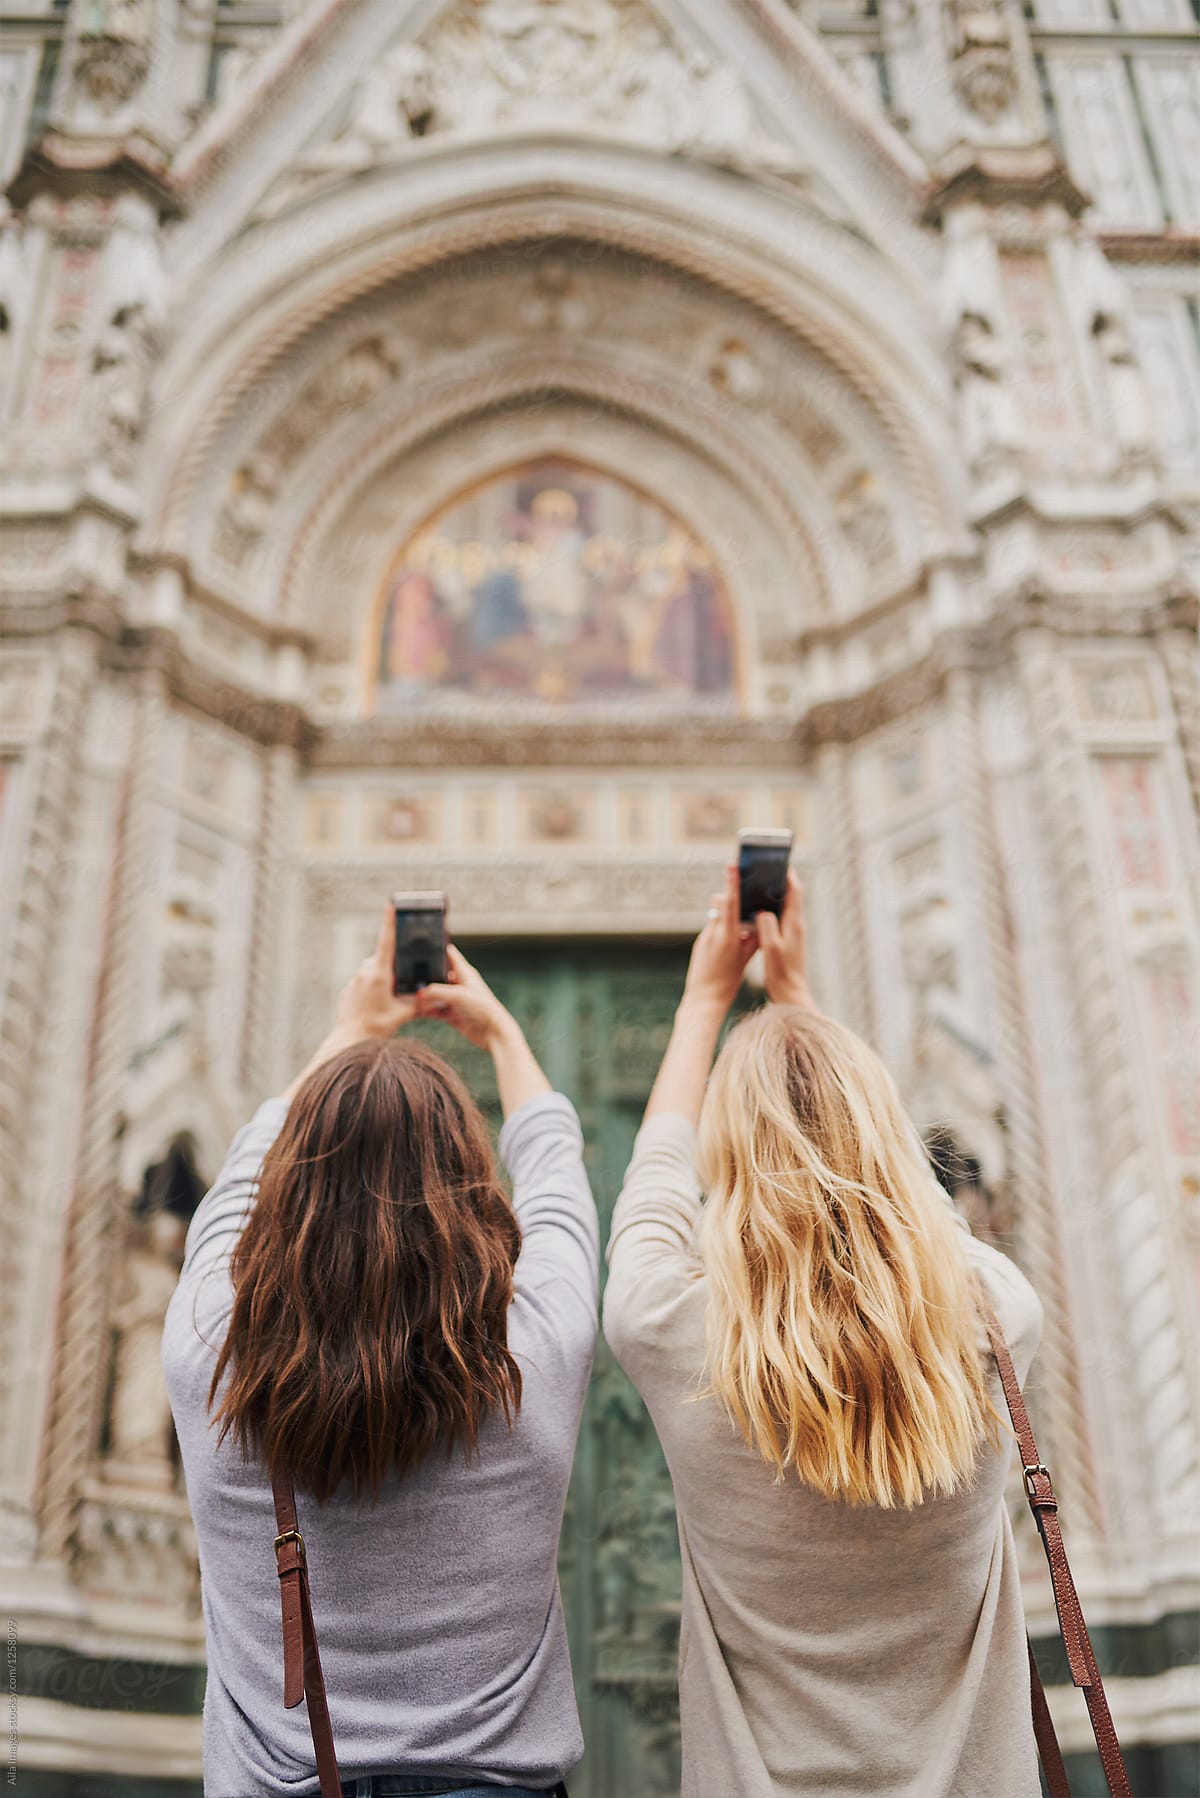 Two girl friends photograph architecture buildings with smart ph